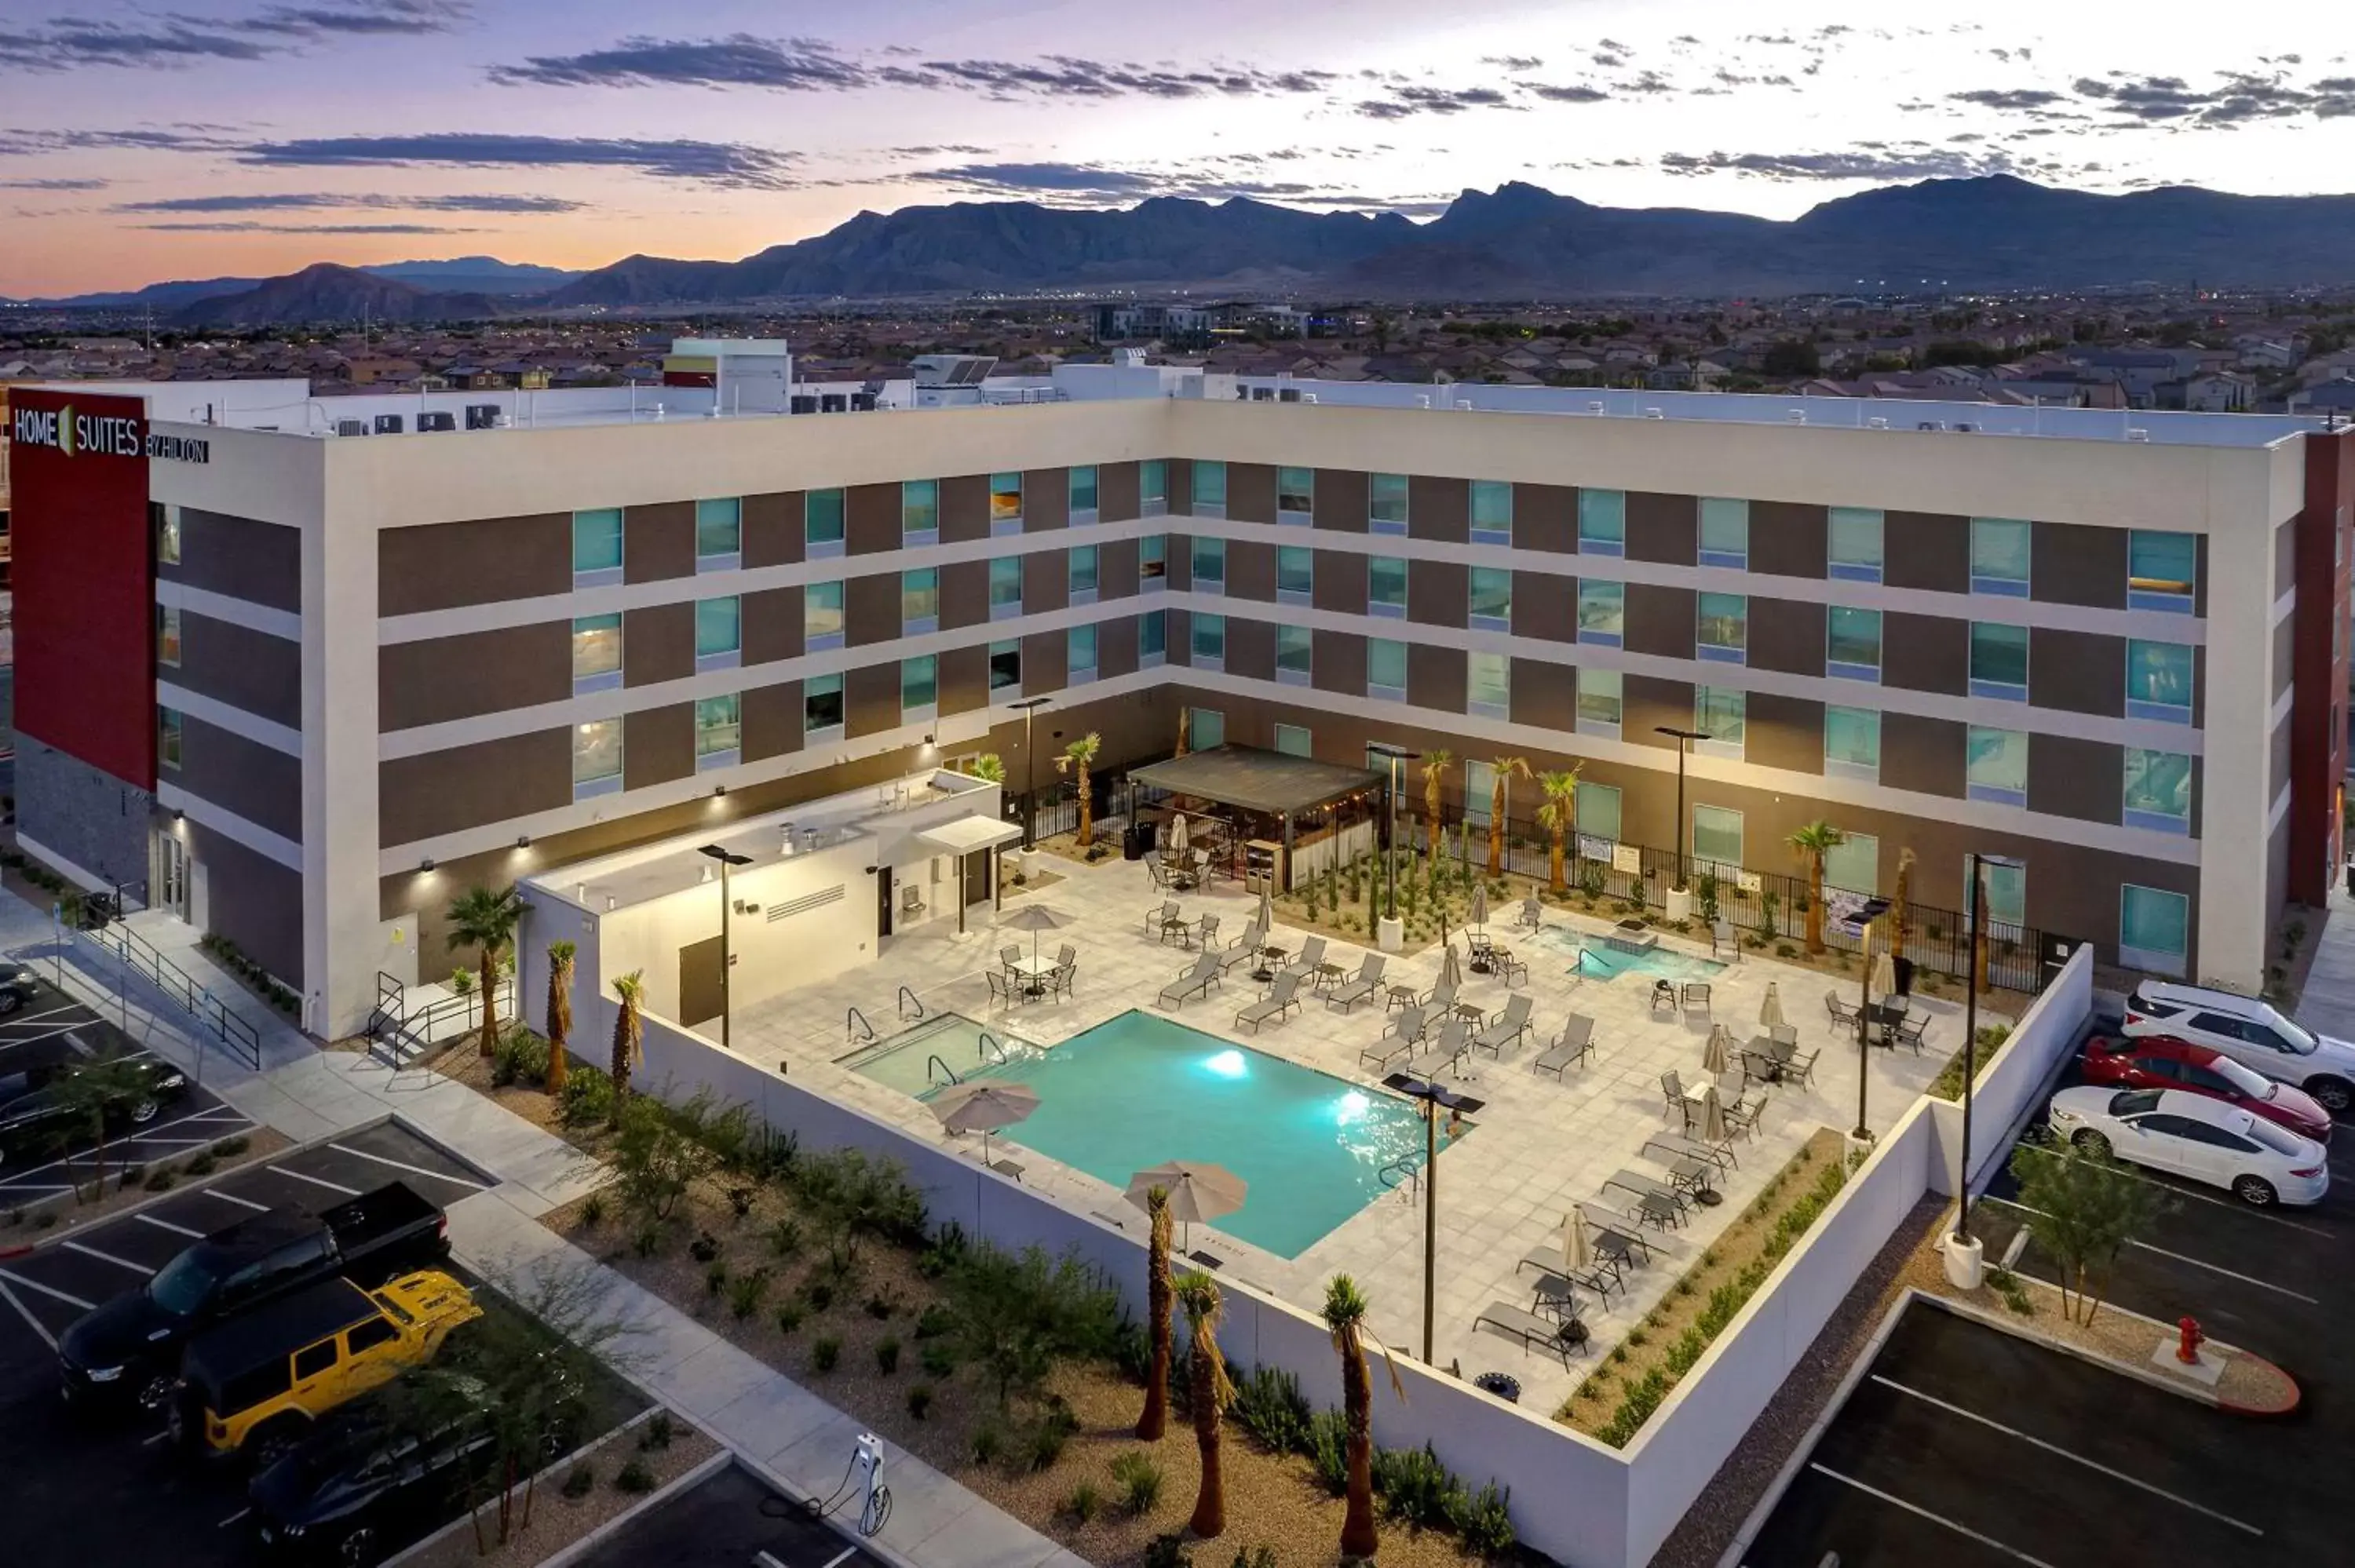 Property building, Pool View in Home2 Suites By Hilton Las Vegas Northwest